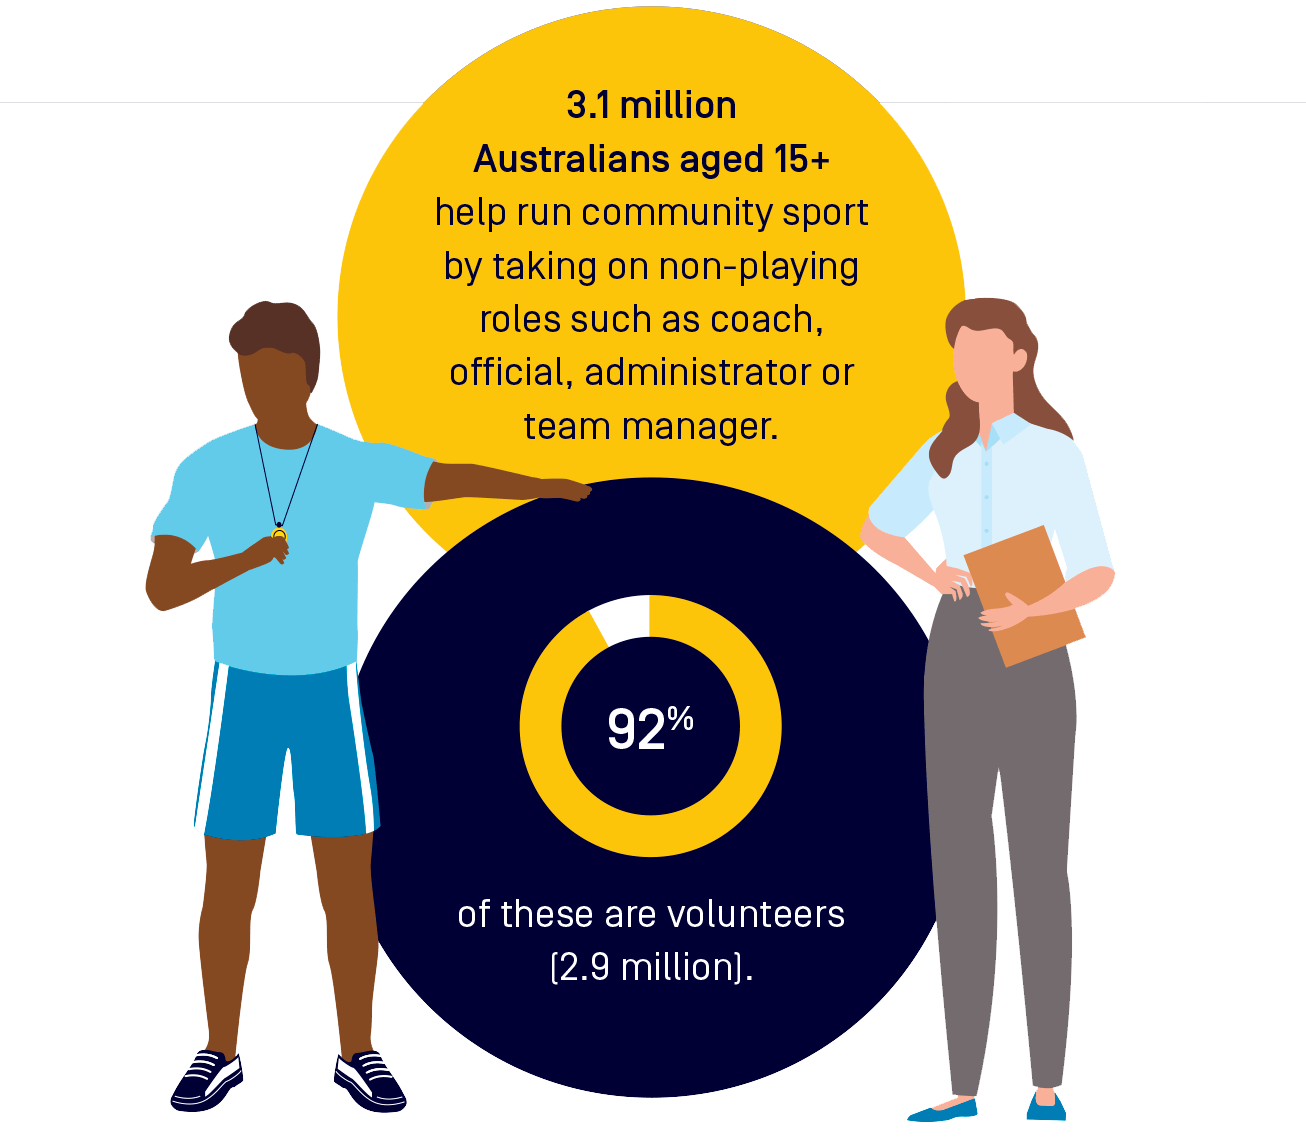 Illustration of man wearing a whistle and woman holding a clipboard. Text: 3.1 million Australians aged 15+ help run community sport by taking on non-playing roles such as coach, official, administrator or team manager. 92% of these are volunteers [2.8 million].